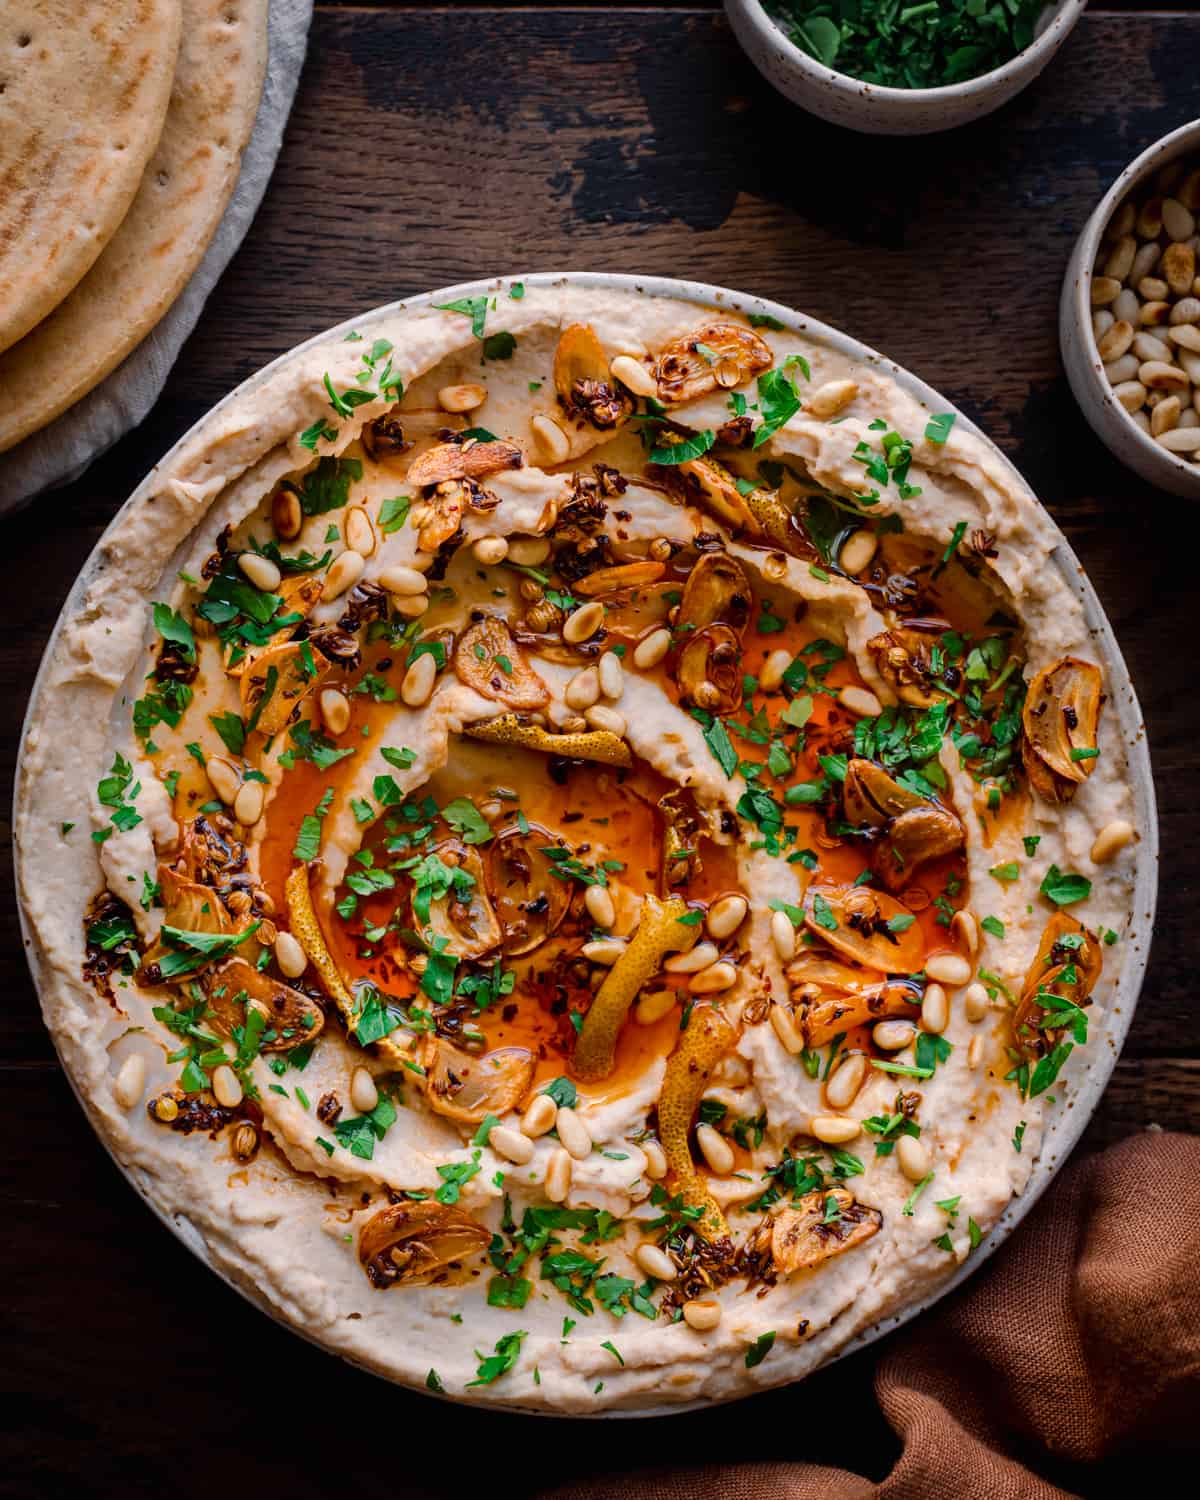 white bean dip with chili oil, garlic, parsley and pine nuts on wooden table with pita bread